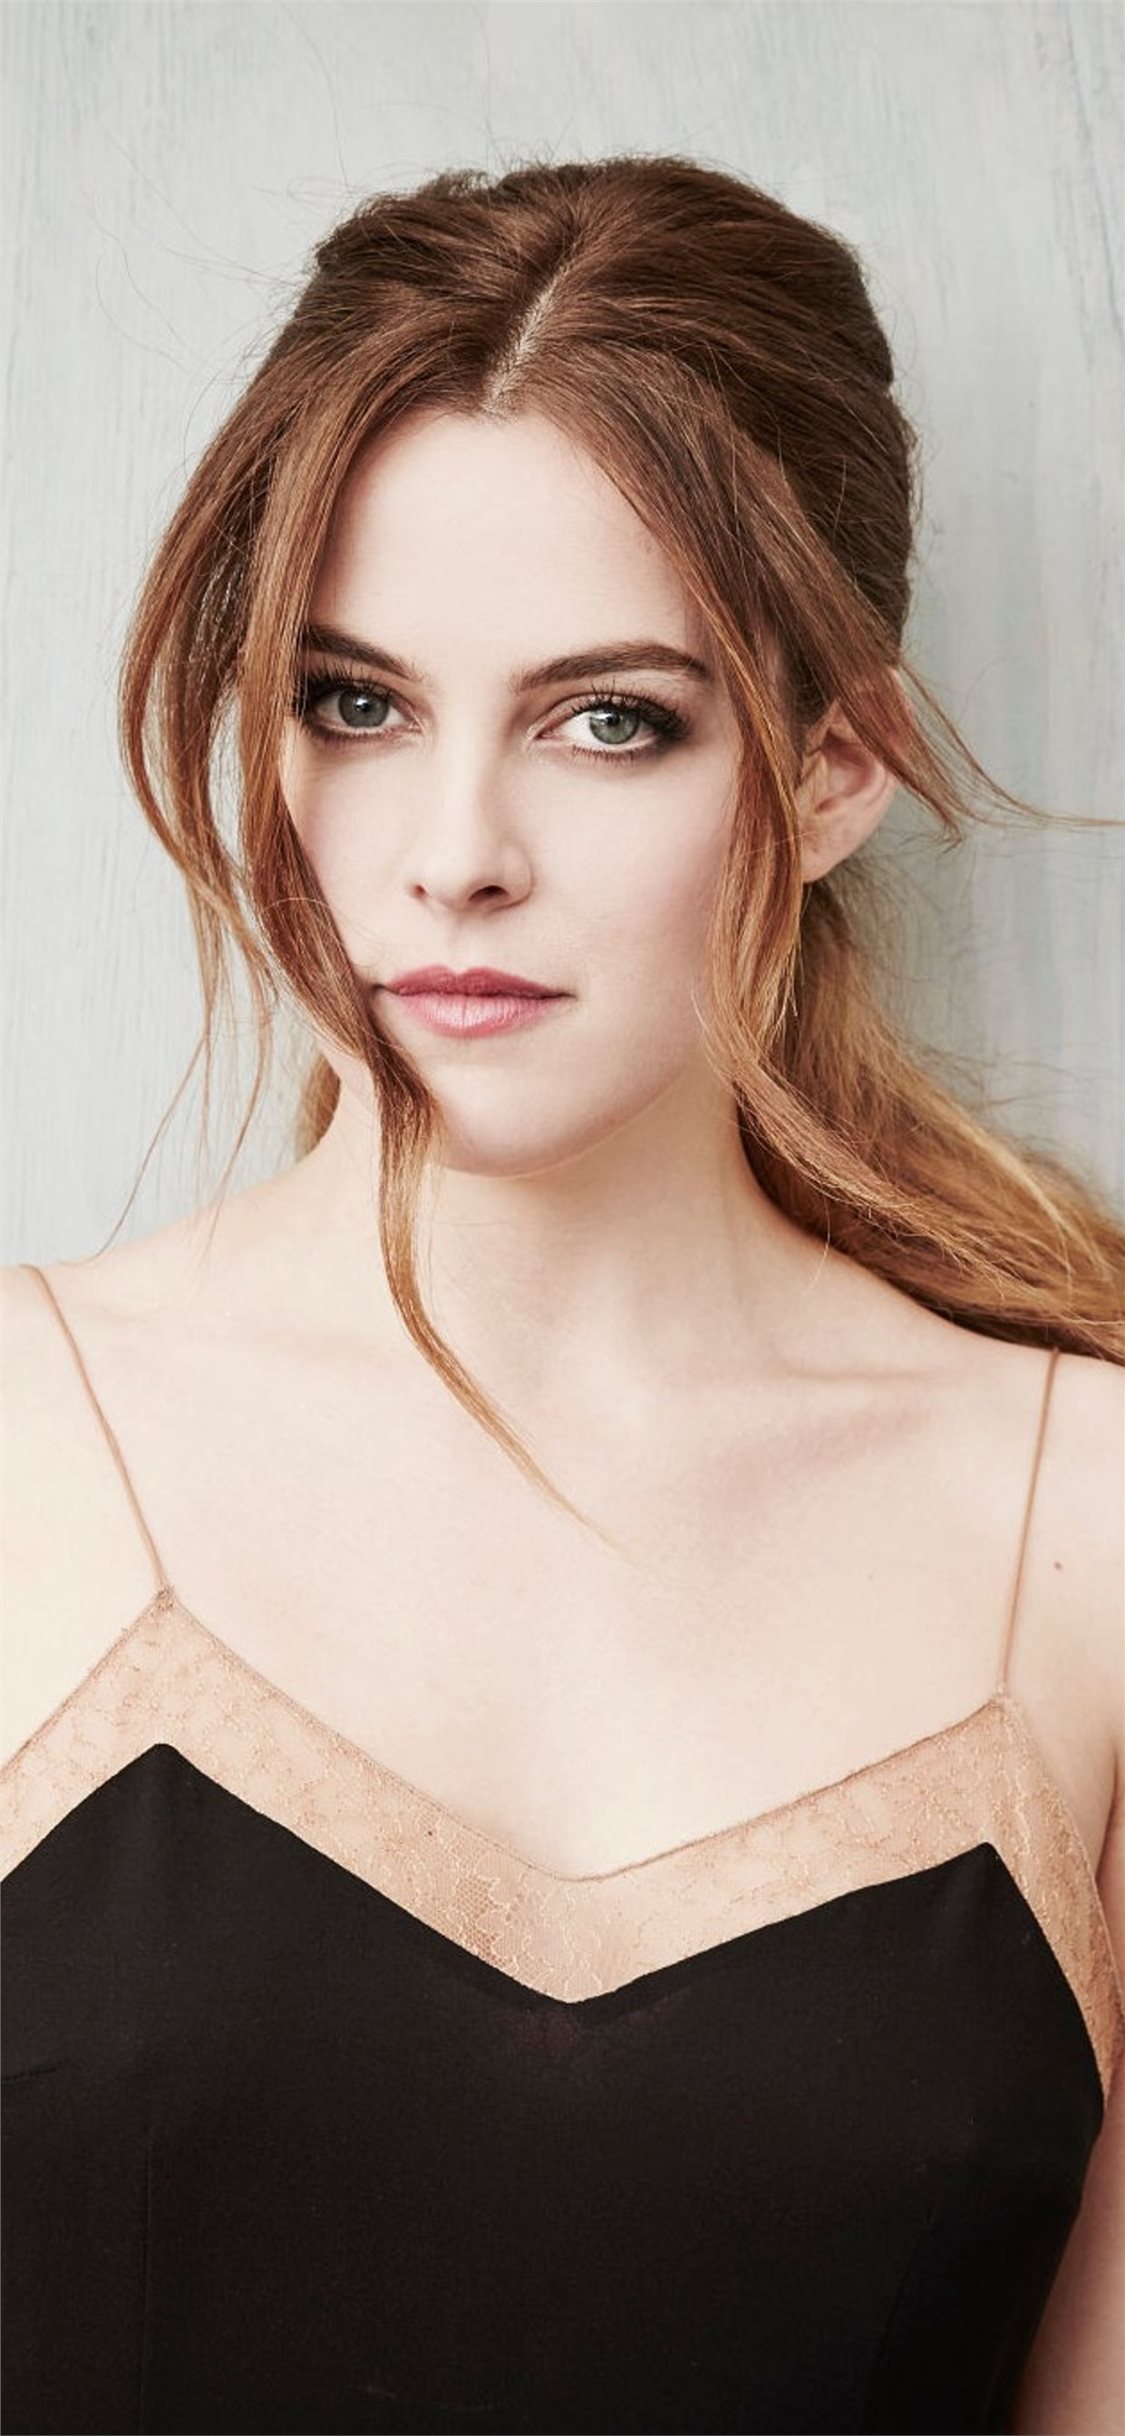 Riley Keough Wallpapers